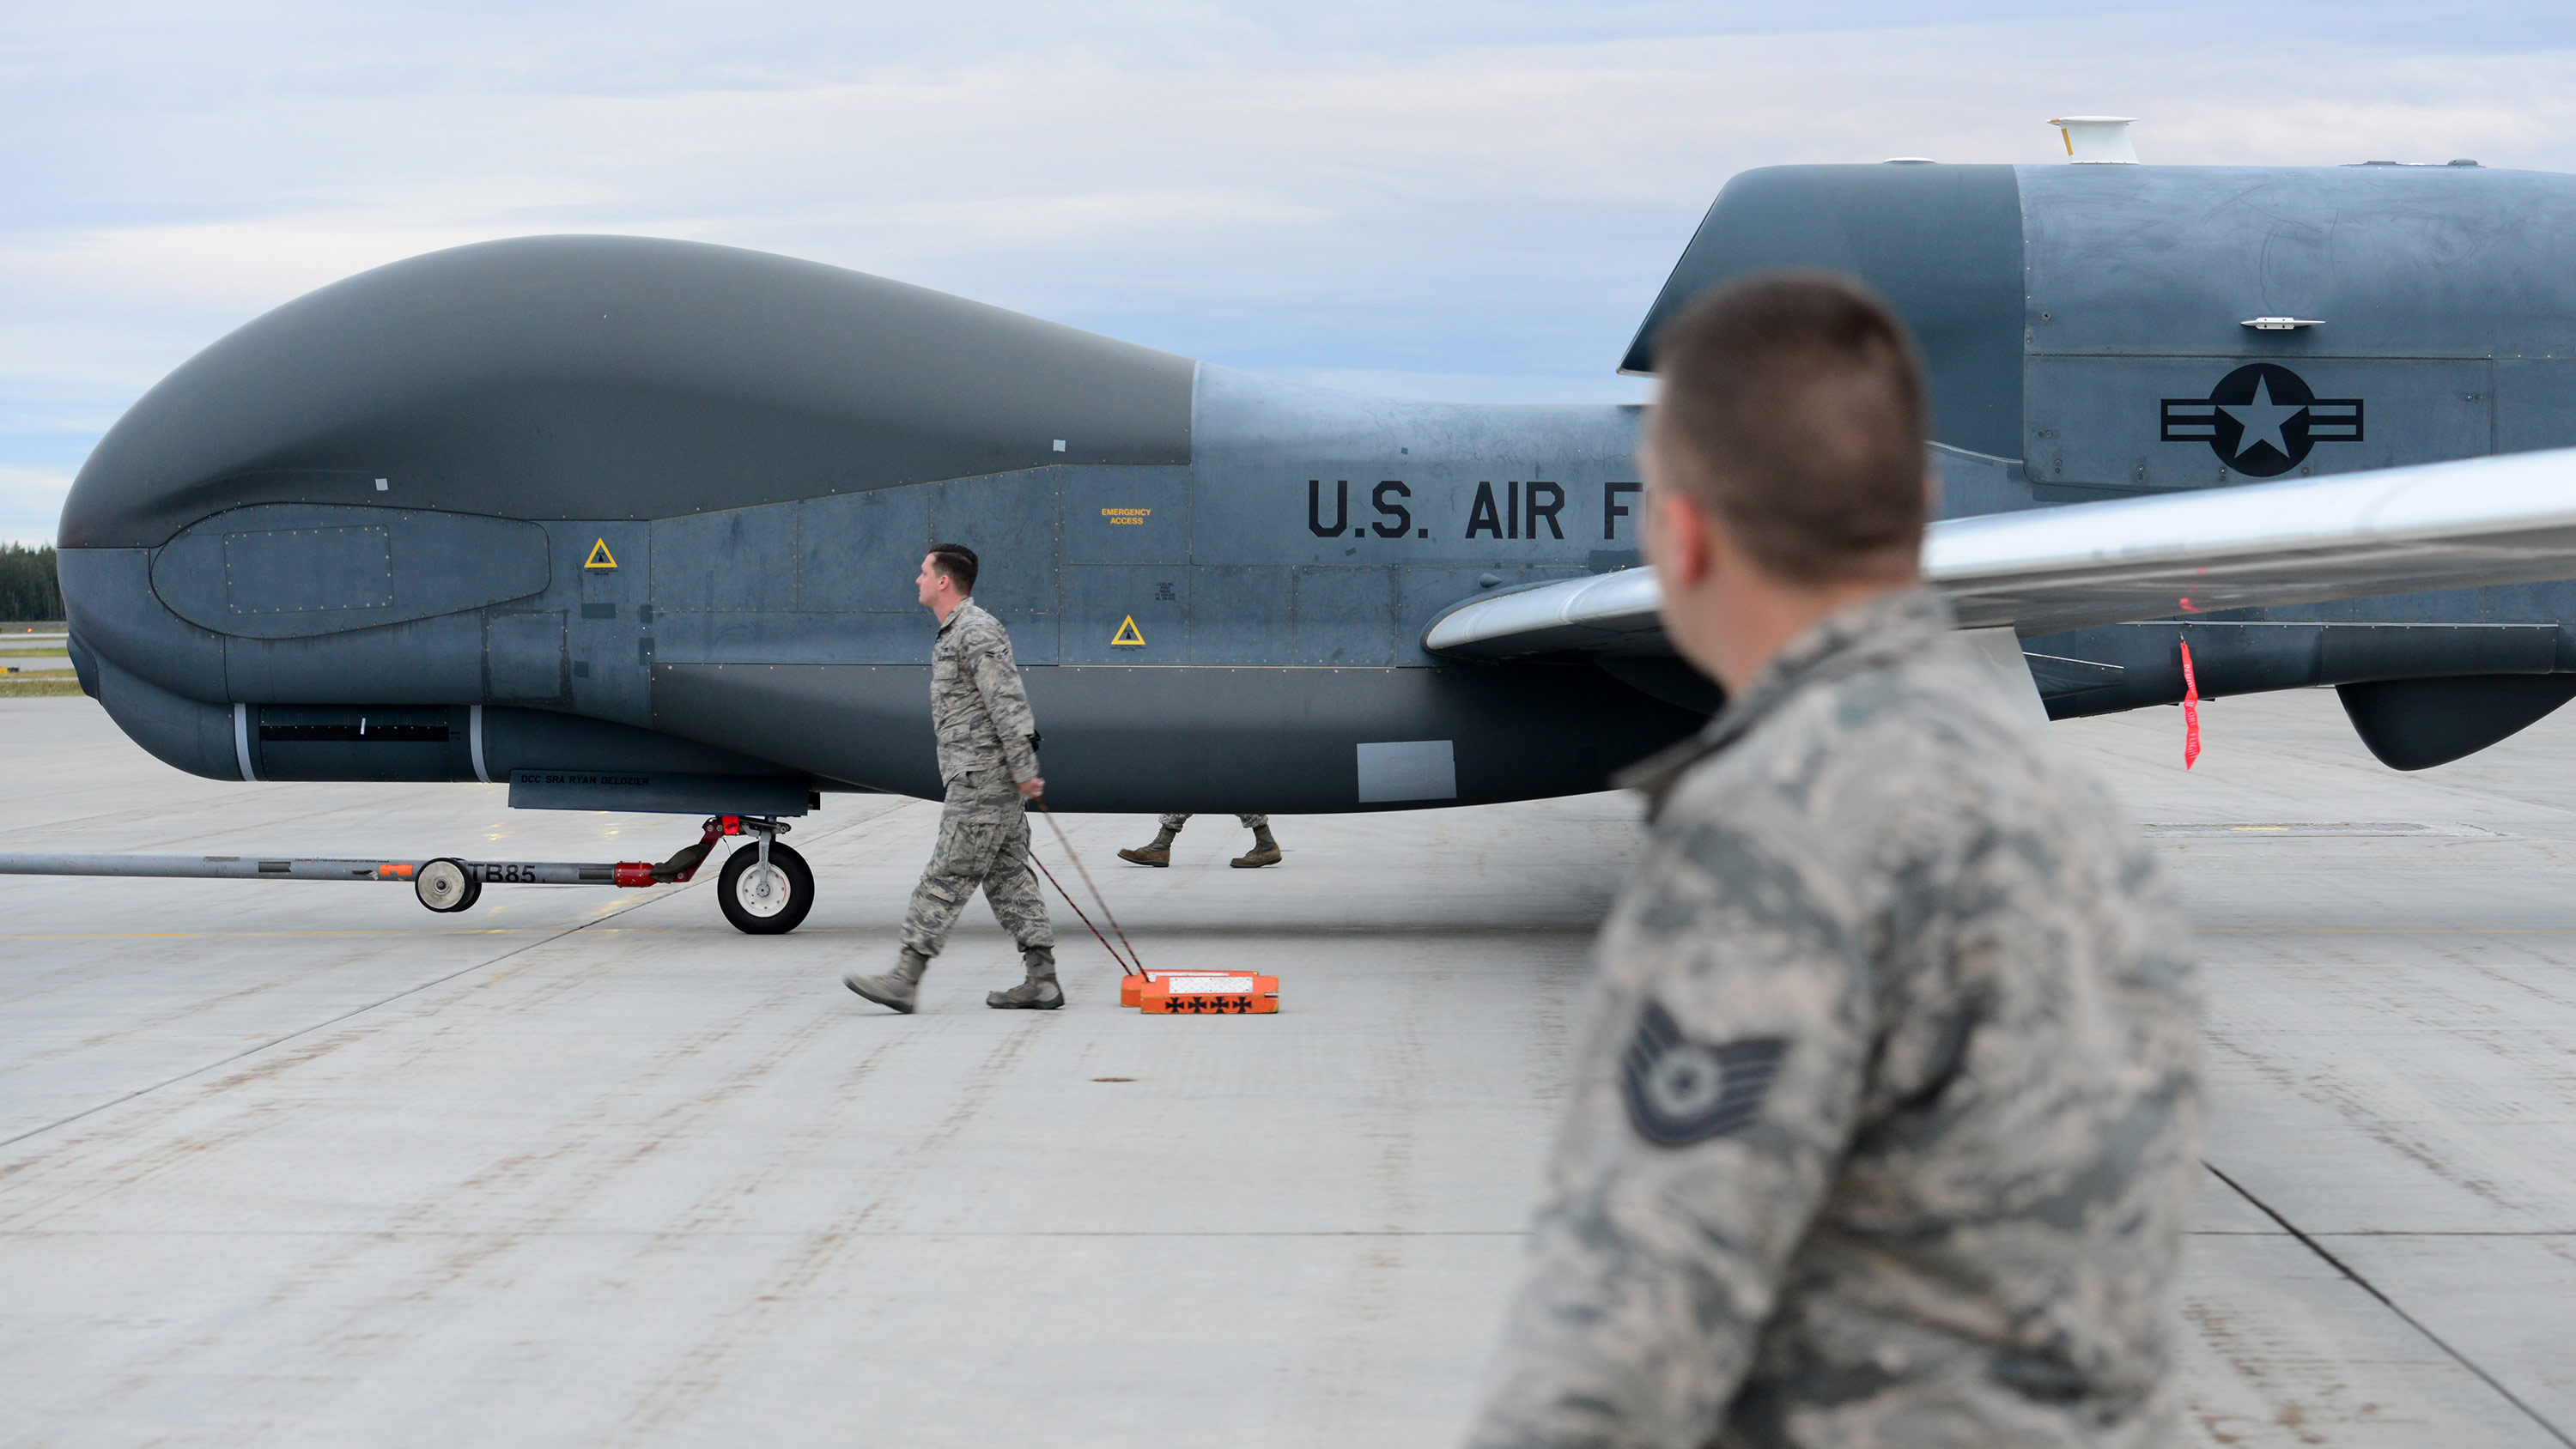 A team of 12th Aircraft Maintenance Unit Airmen walk beside an RQ-4 Global Hawk while it’s being towed during Red Flag Alaska 18-3, Aug. 16, 2018, at Eielson Air Force Base, Alaska. This marks the first time an RQ-4 has landed in Alaska during a simulated combat training exercise. (U.S. Air Force photo by Airman 1st Class Tristan D. Viglianco)